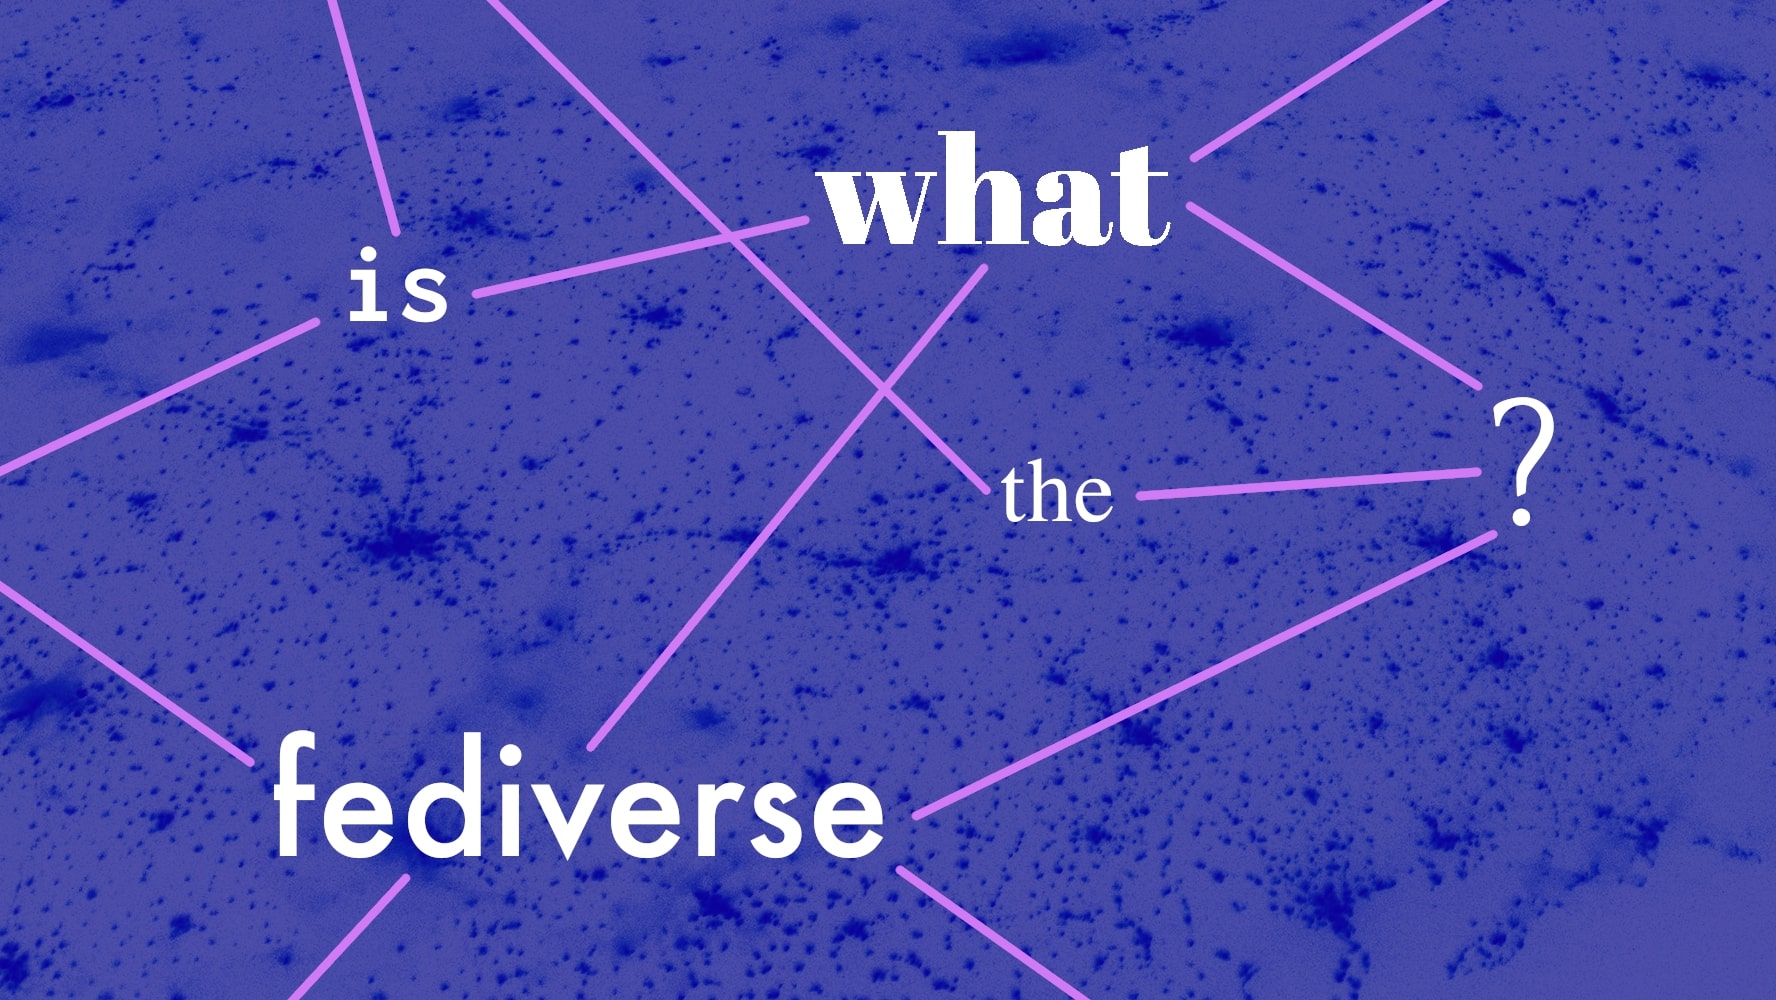 The text 'What is the fediverse? with lines representing a network structure between the words, placed on top of a satellite image of the earth.